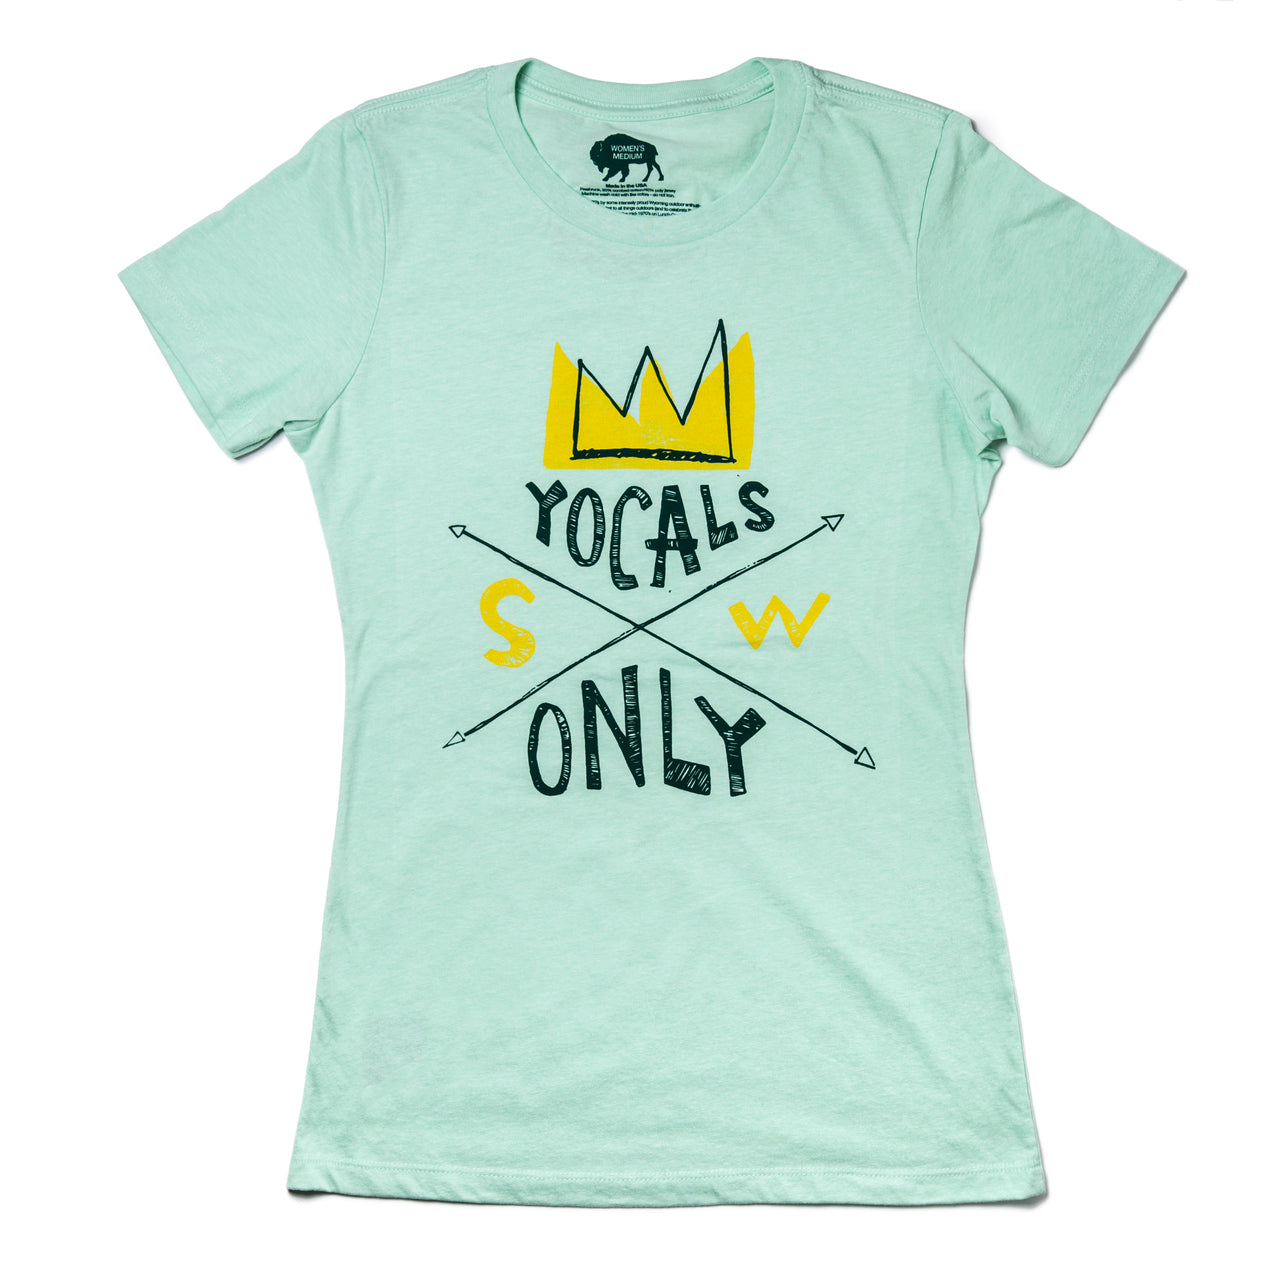 Surf Wyoming-W's Yocals Only Tee - Mint-